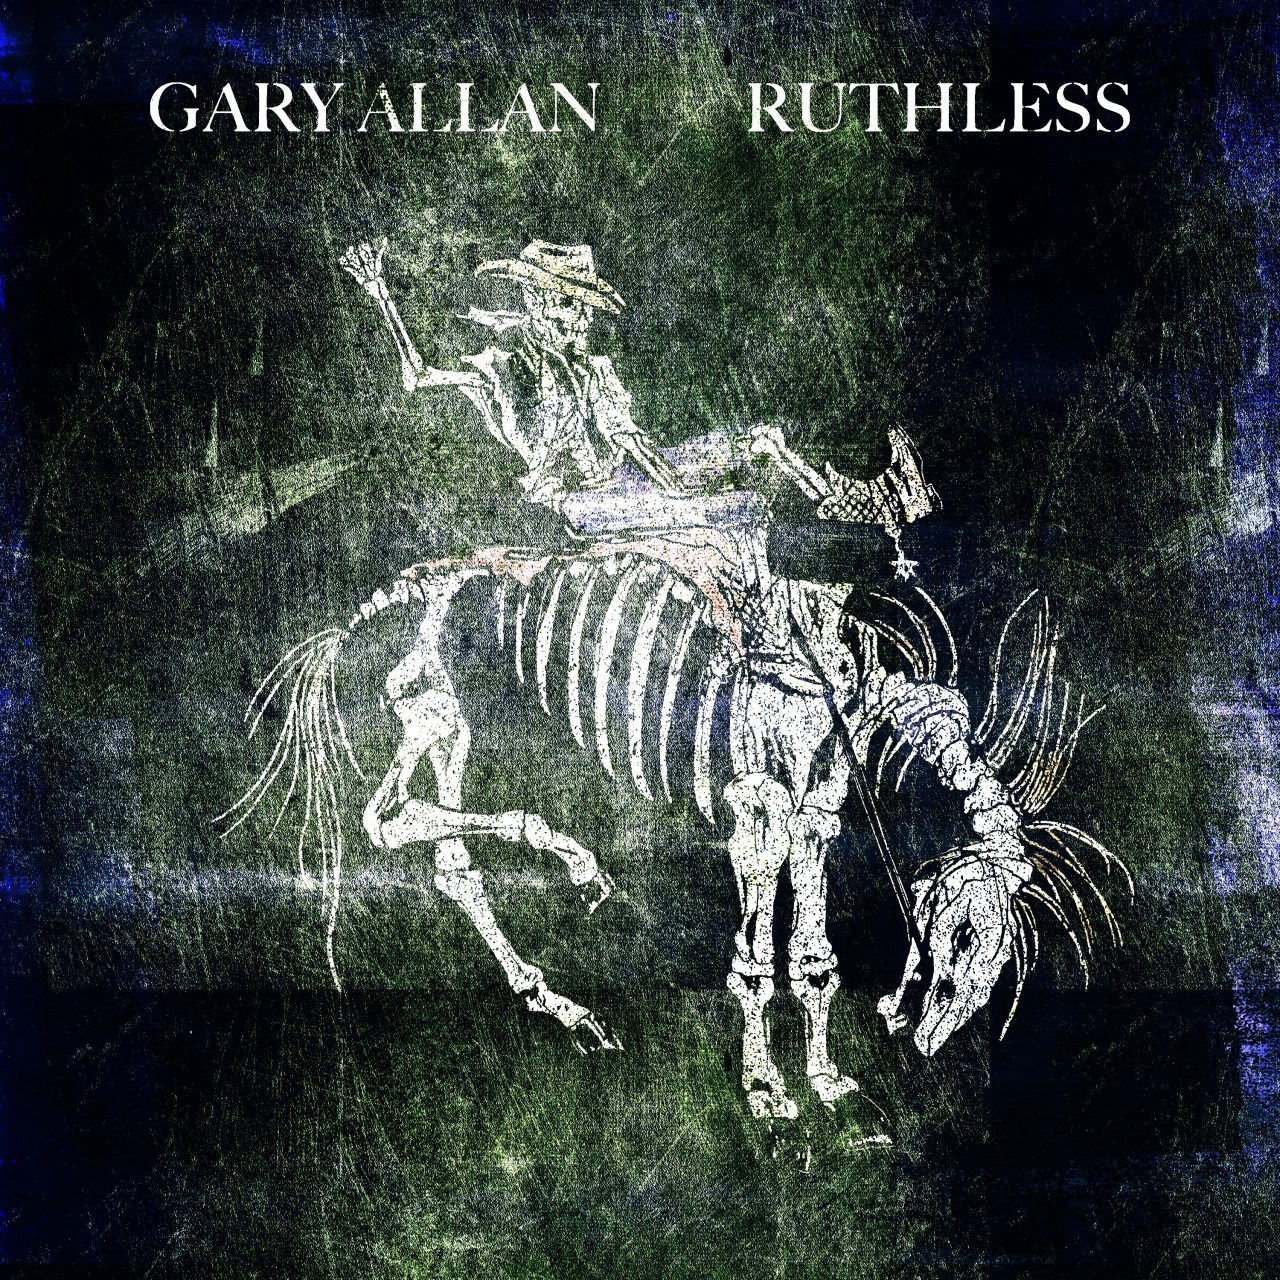 Gary Allan Compiled 'Ruthless' Album From Three Different Projects